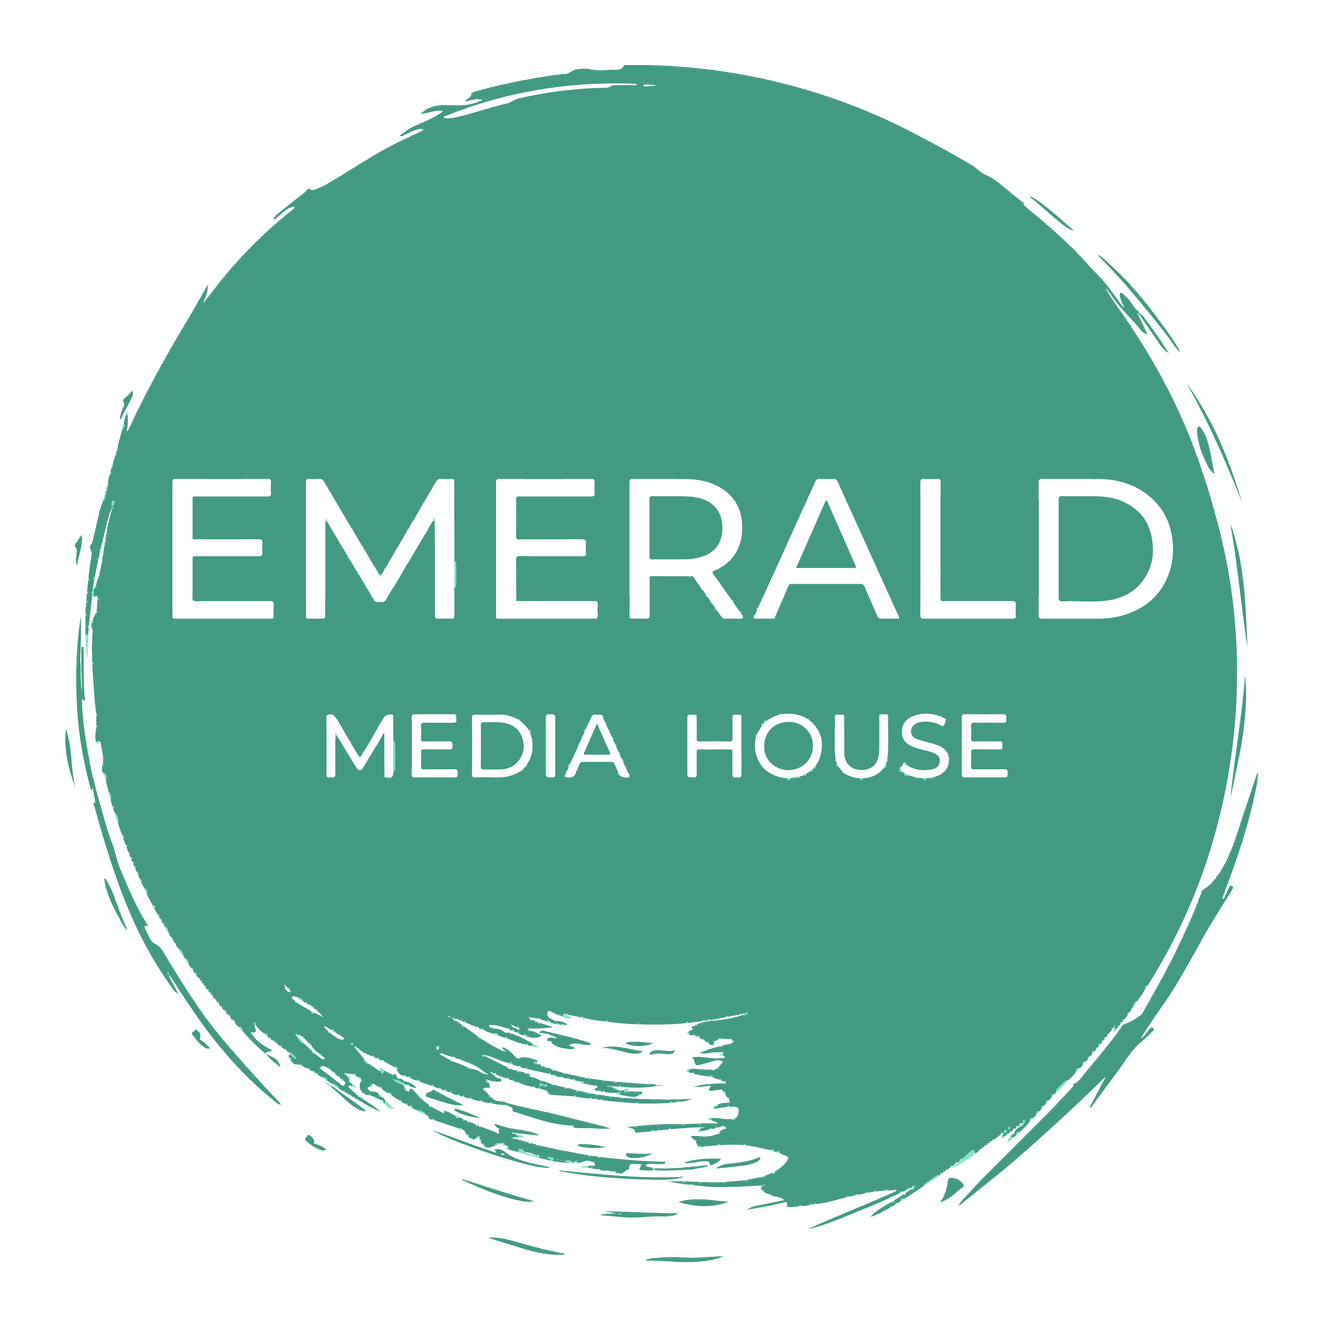 Product Services | Emerald Media House image